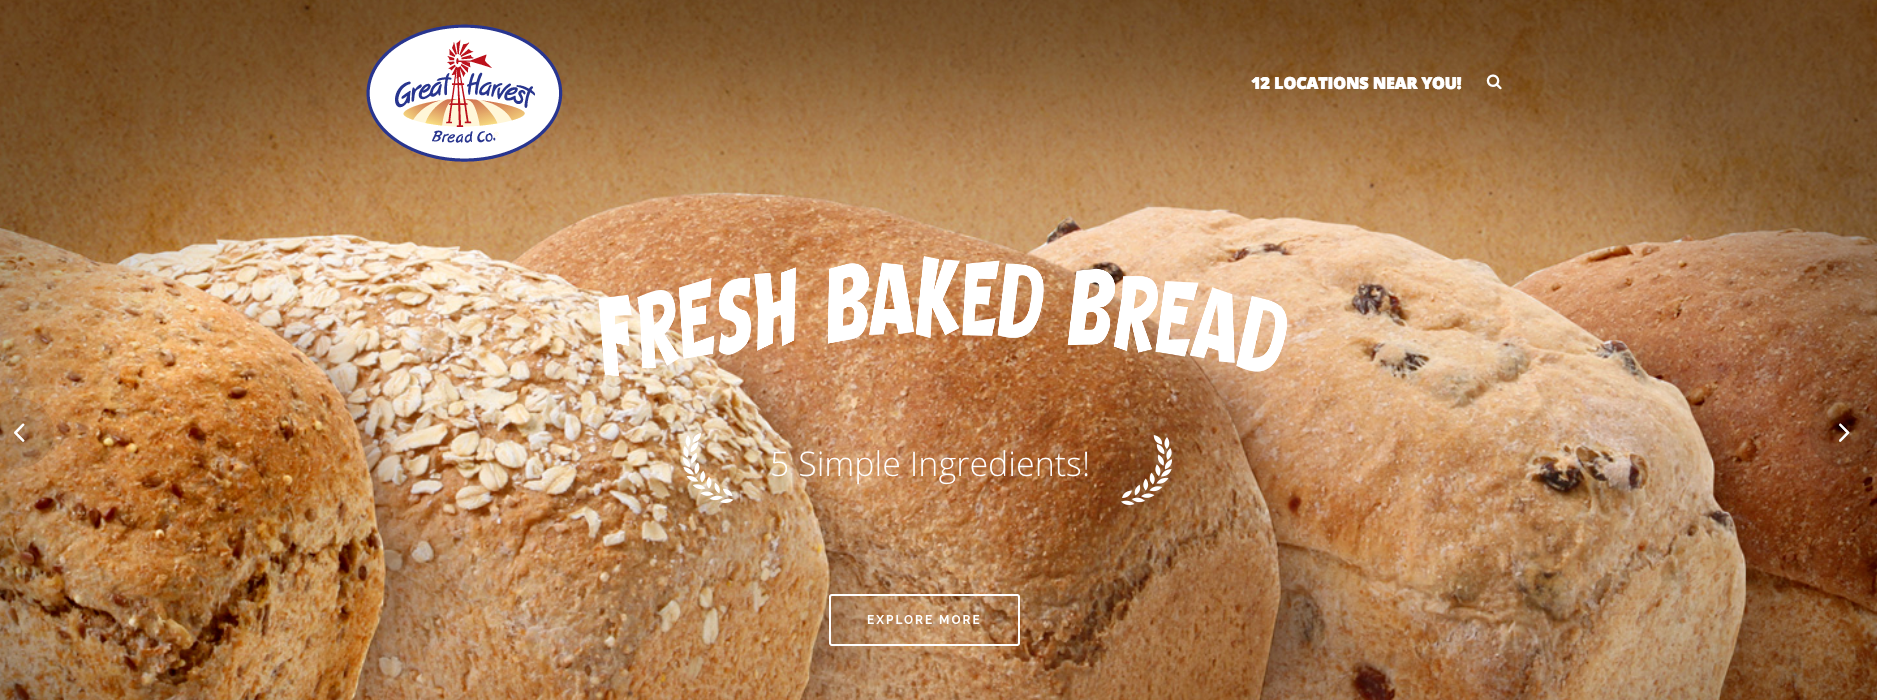 New Great Harvest Bread Co. Website! 